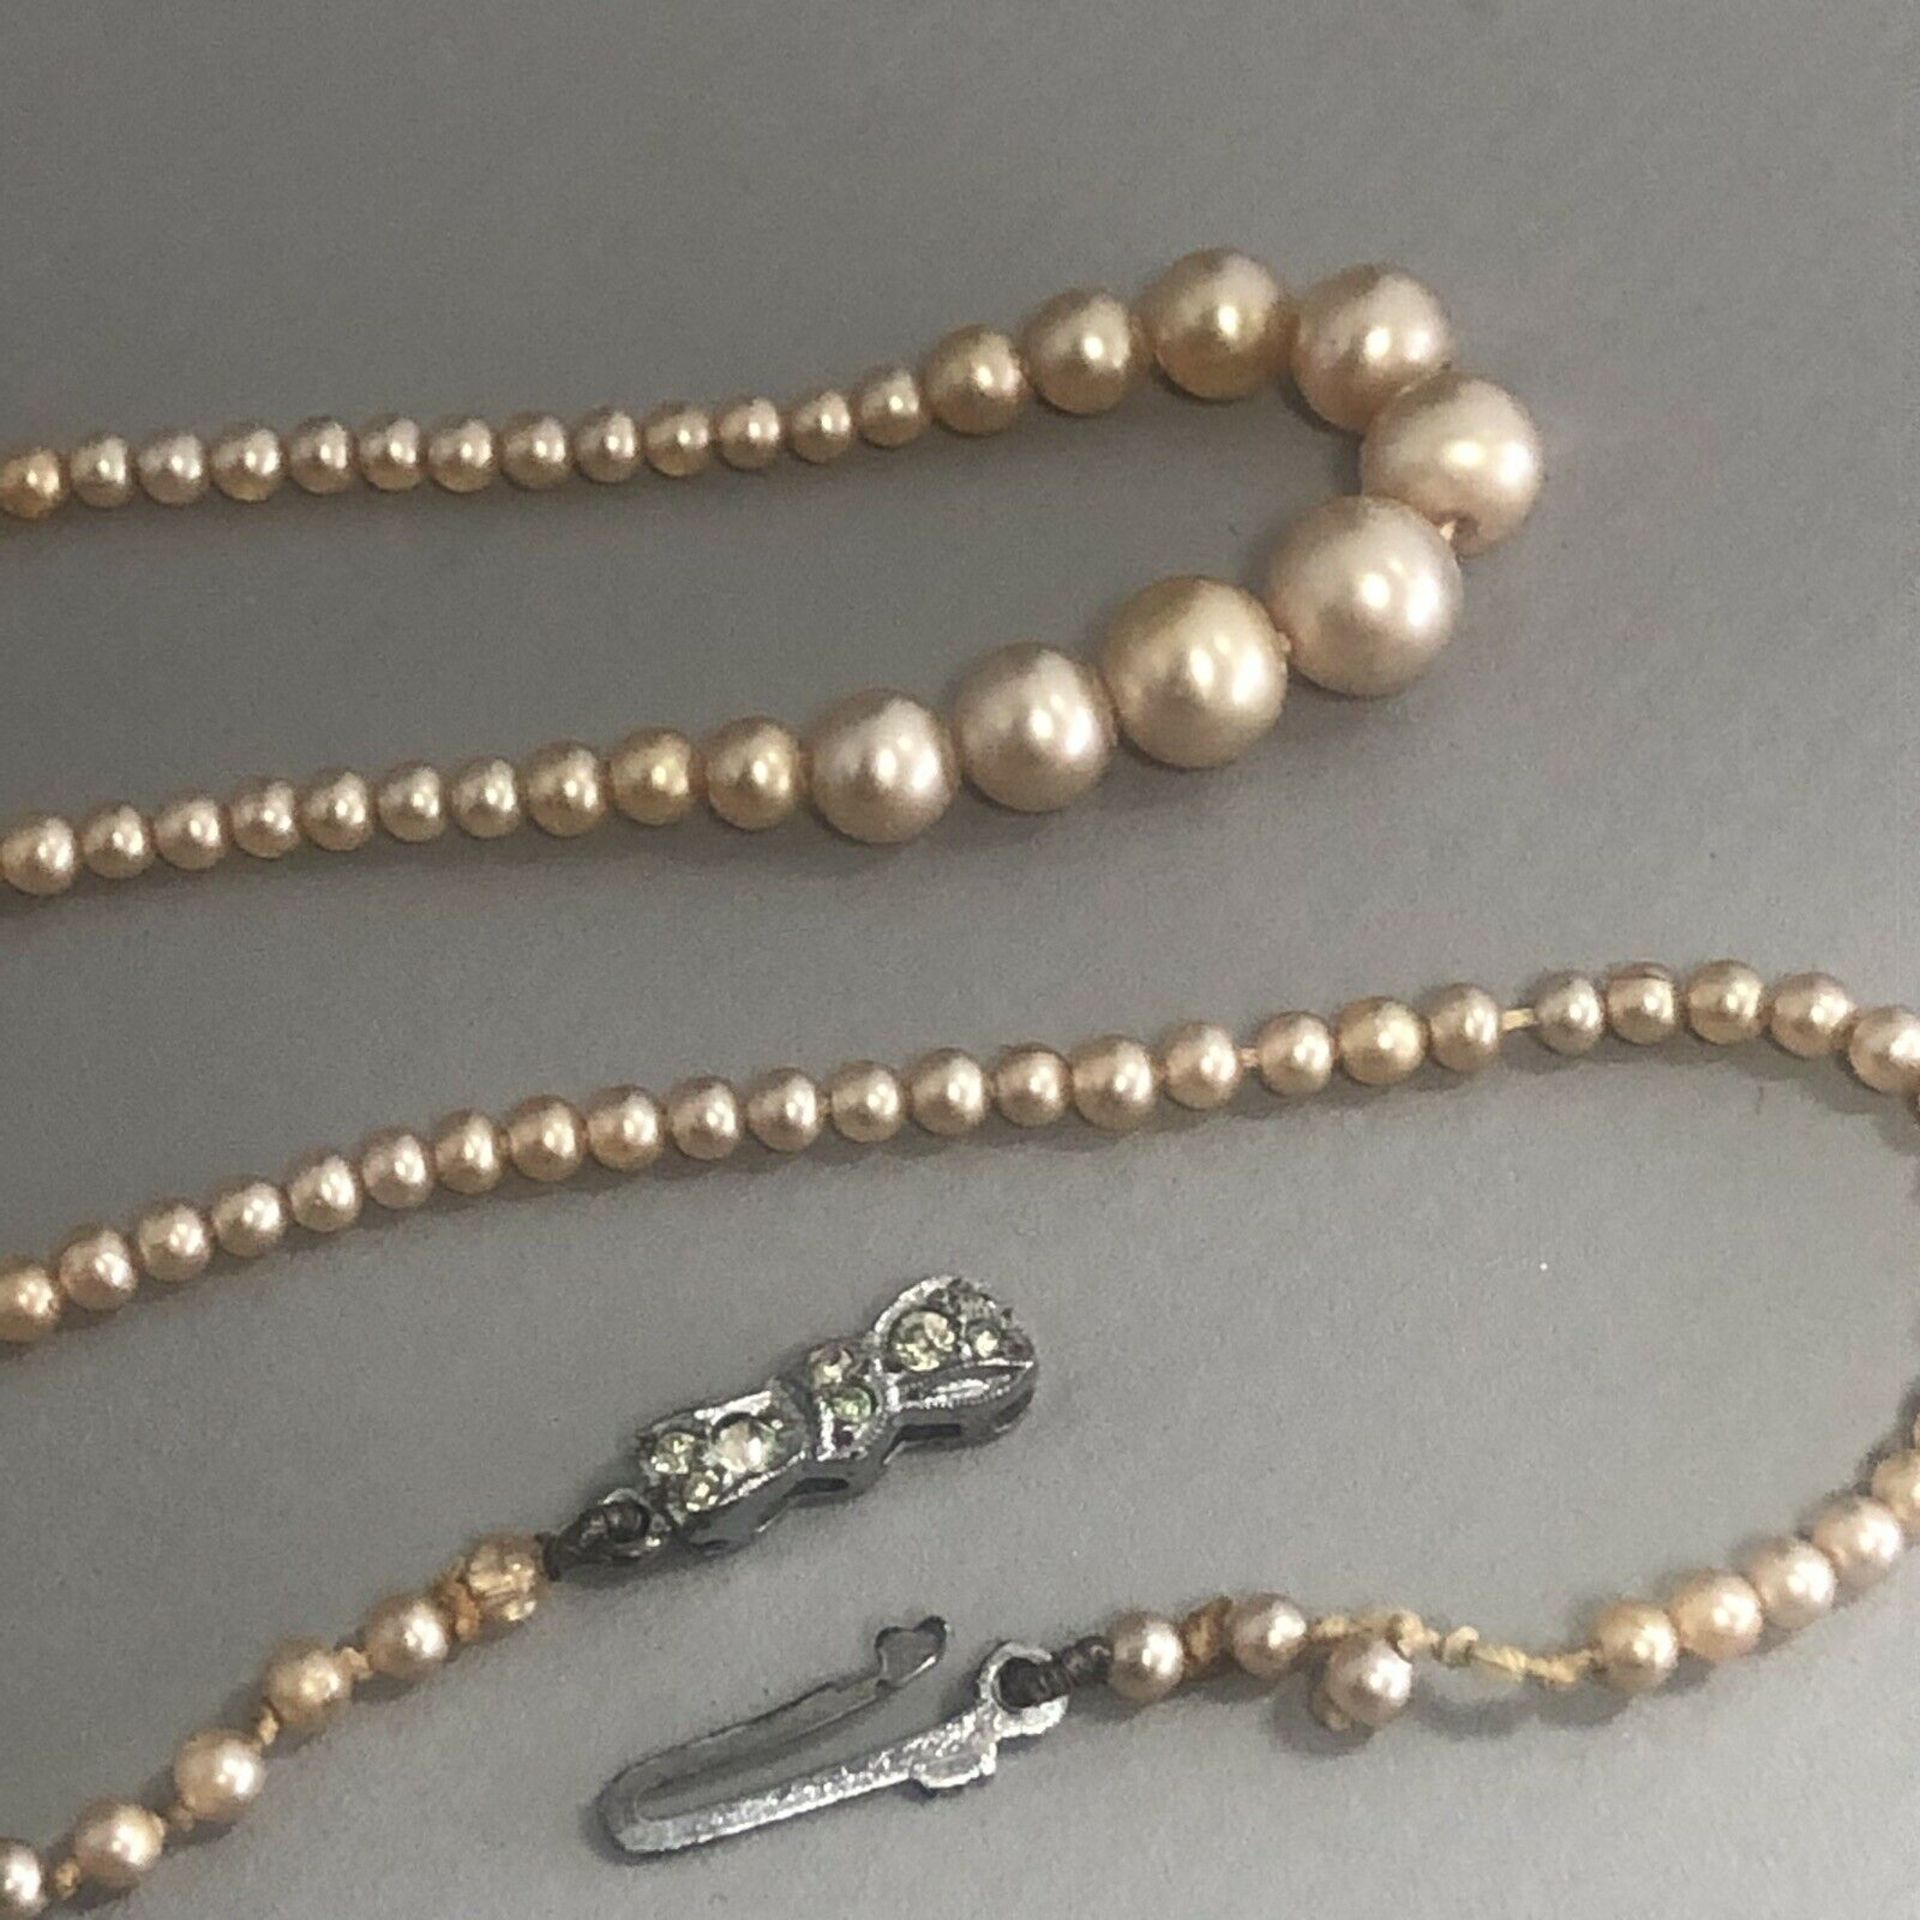 An antique delicate dainty faux pearl necklace graduated pearls - silver clasp - Image 2 of 6